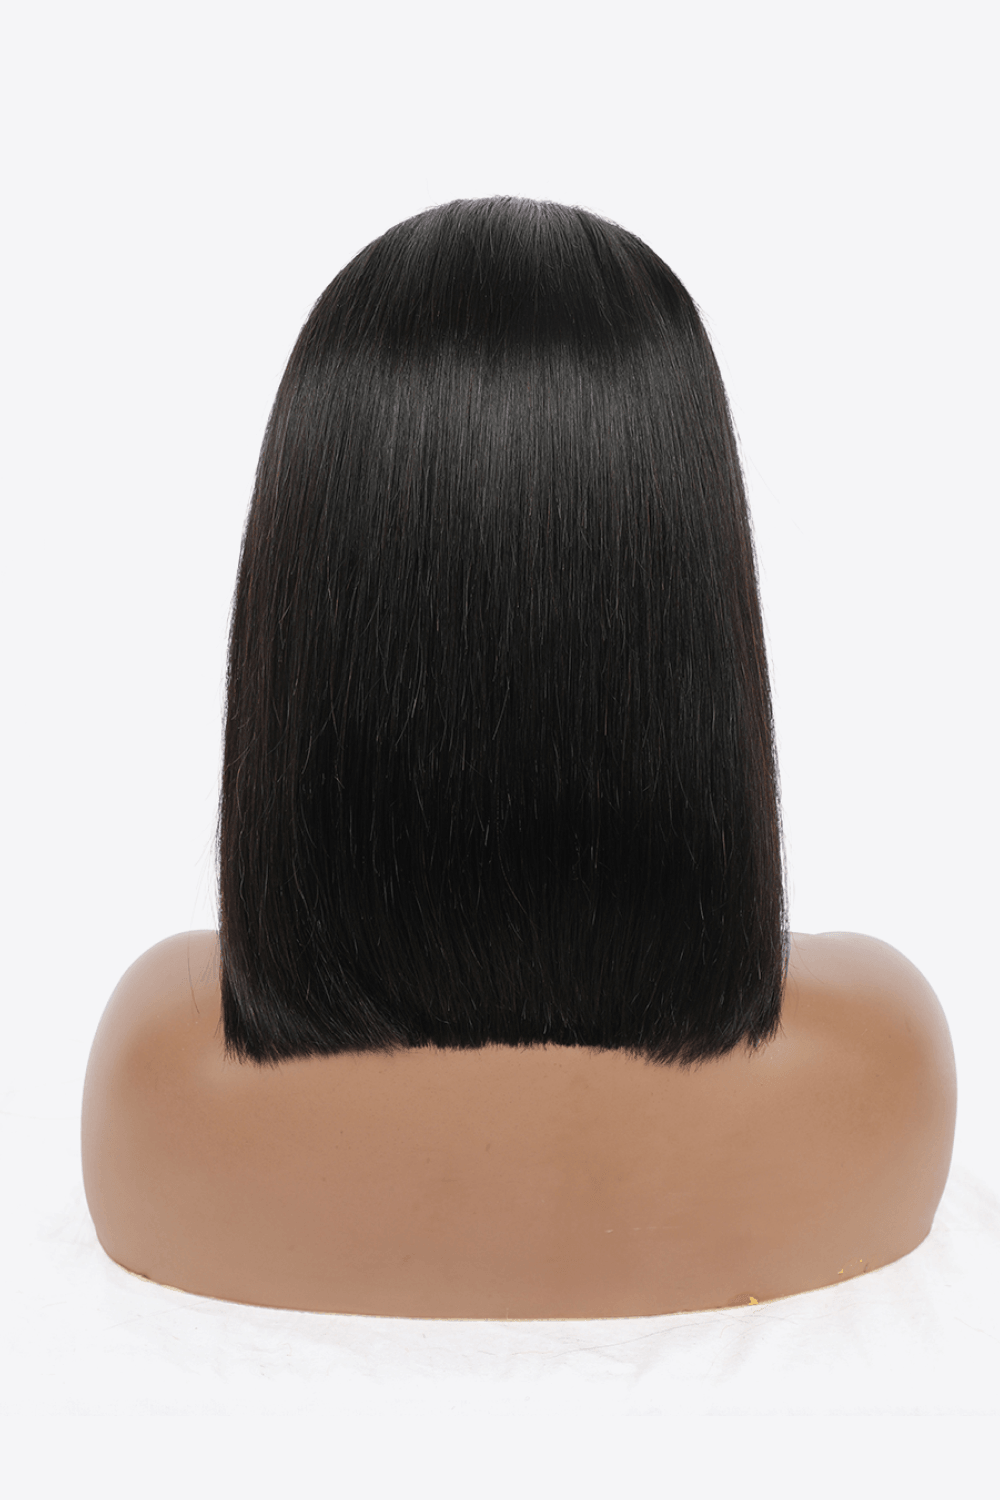 a wig on a mannequin head with a white background